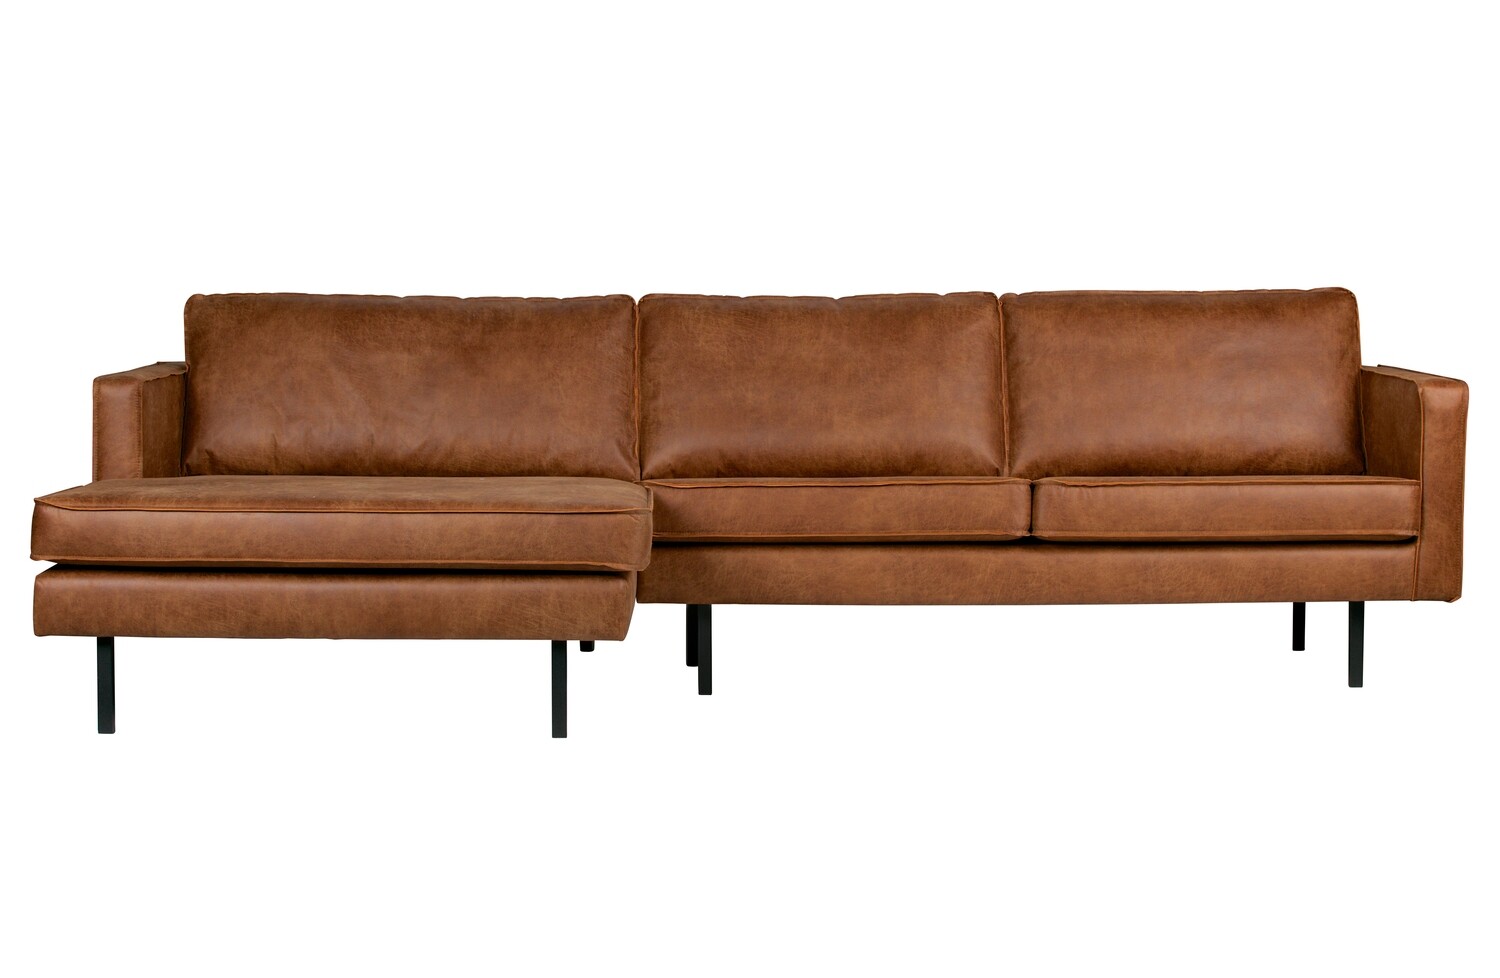 RODEO CHAISE LONGUE